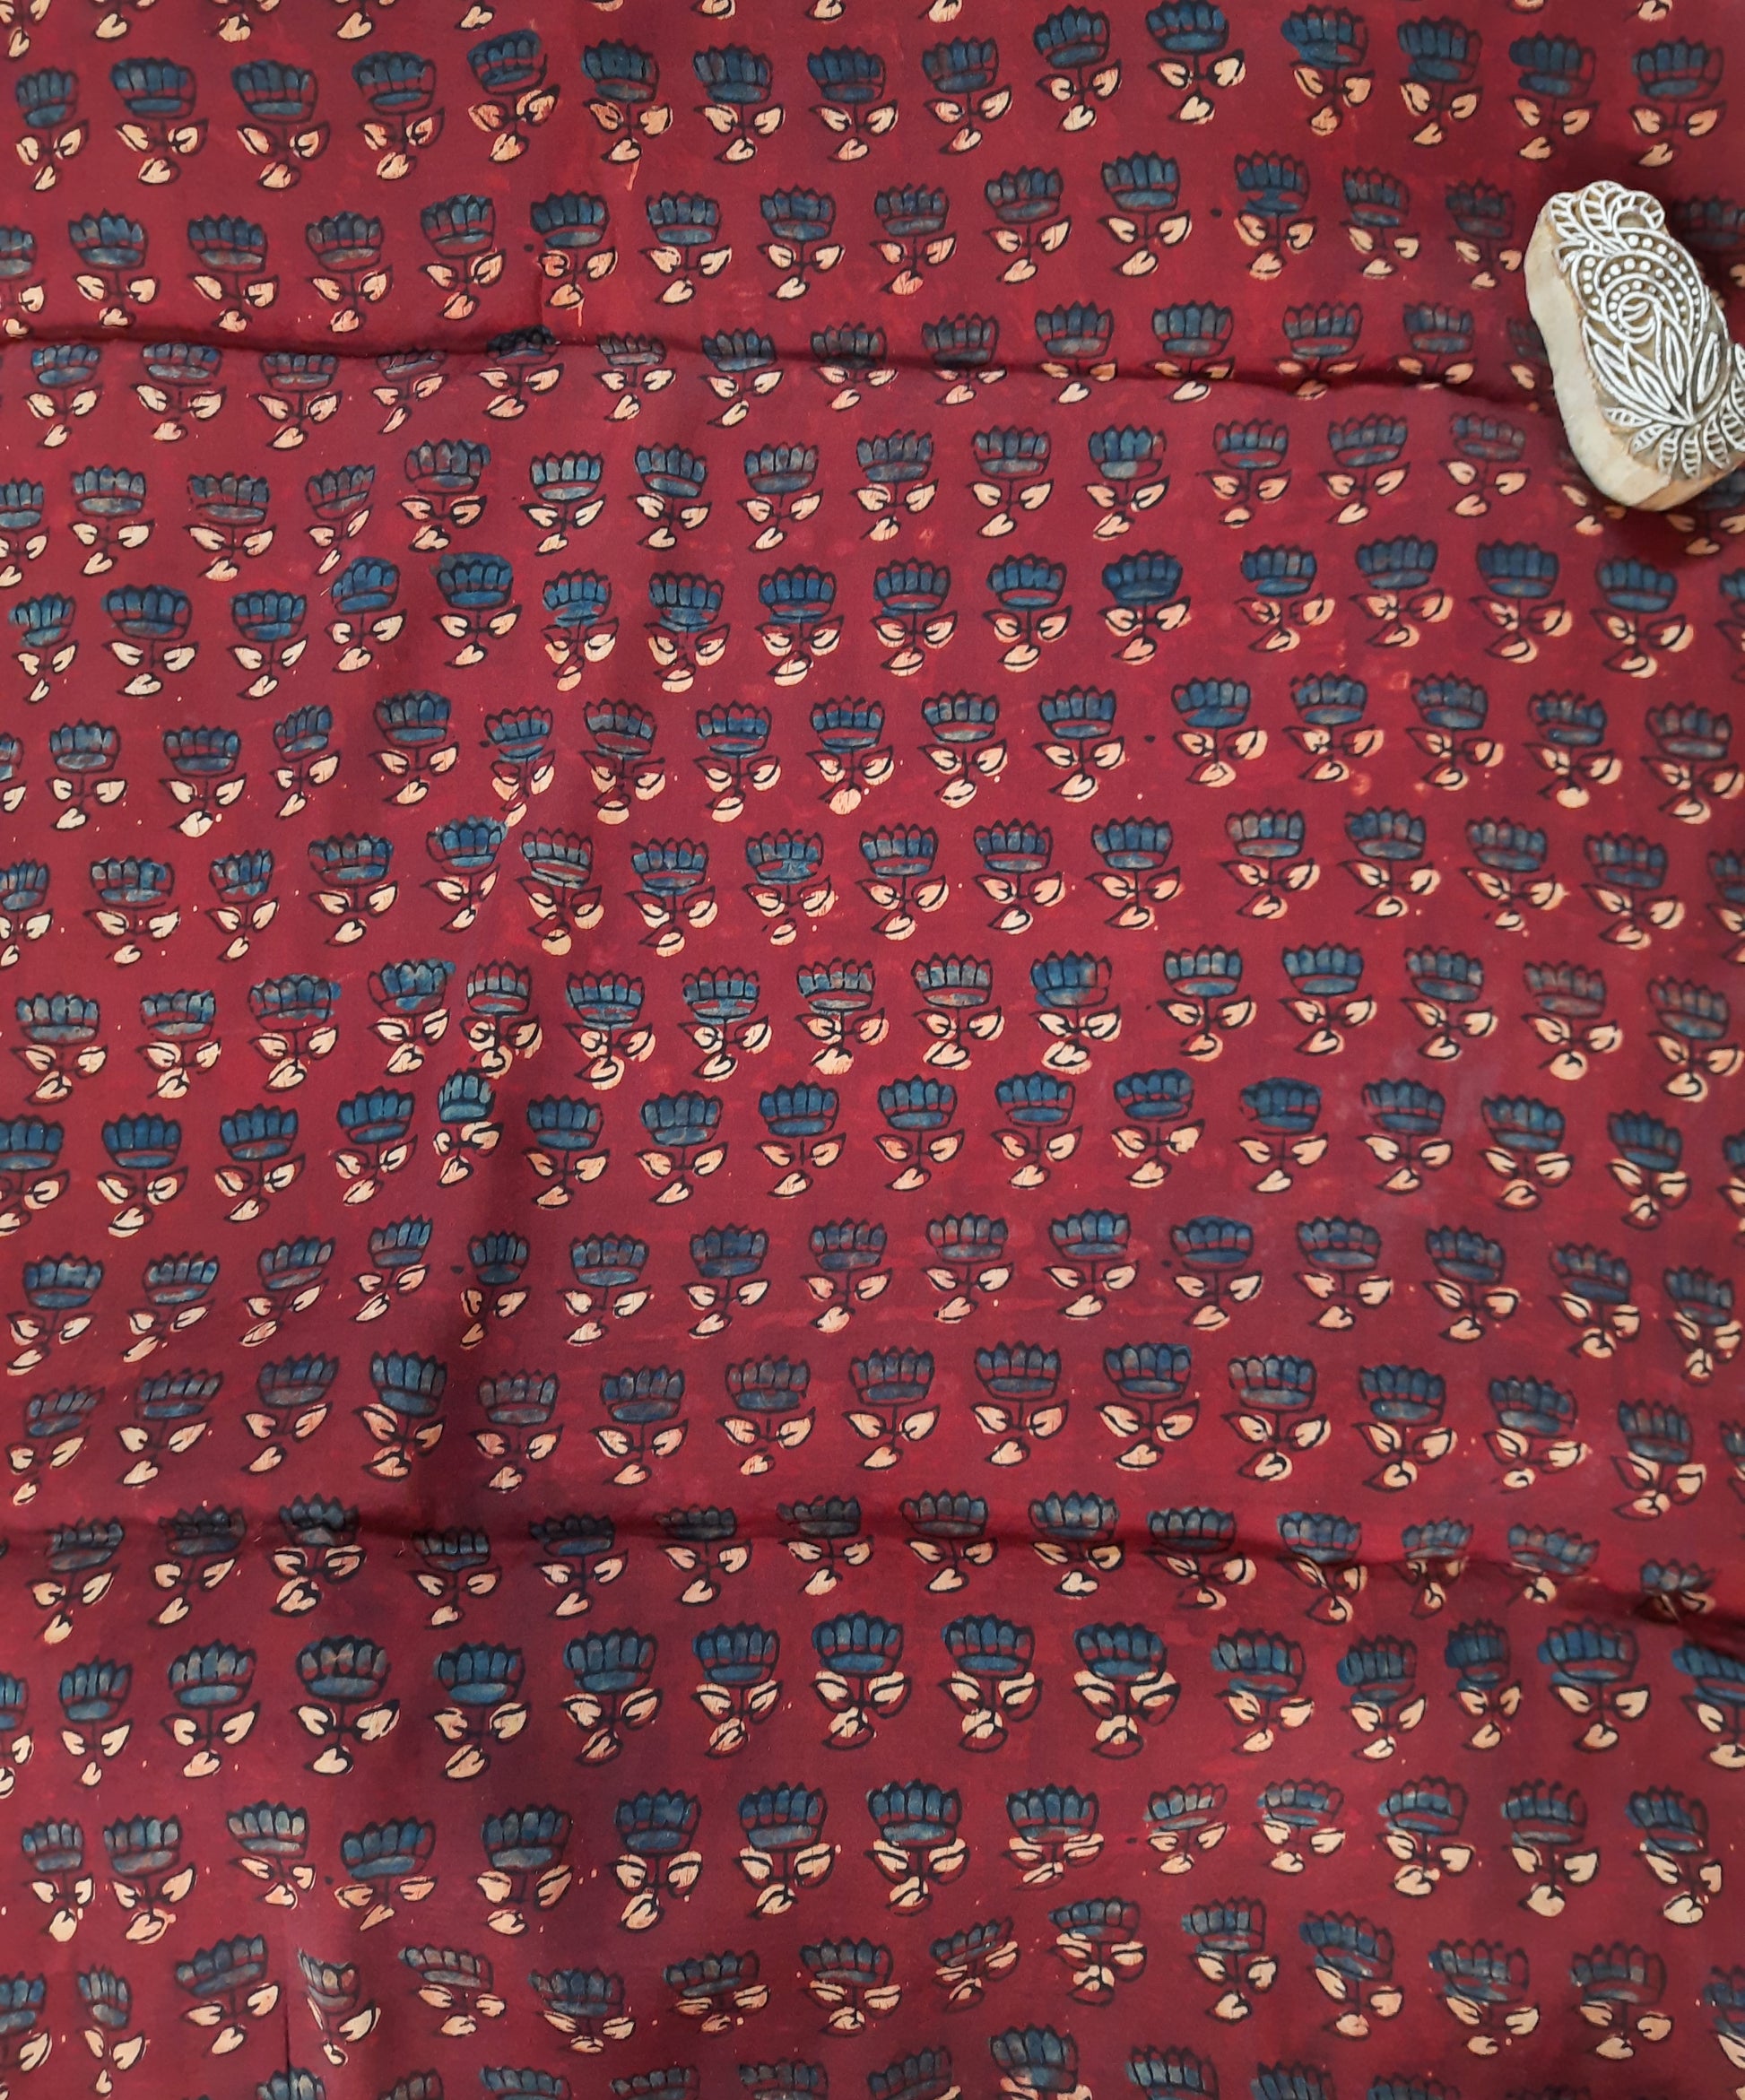 Experience luxury with this Madder-Dyed Maroon Ajrakh Hand Block Printed Modal Silk Fabric. This fabric is expertly crafted using traditional techniques of ajrakh hand block printing and natural dyeing. With its rich madder dye and artisanal quality, this fabric is sure to elevate your wardrobe and create a statement of elegance and sophistication.